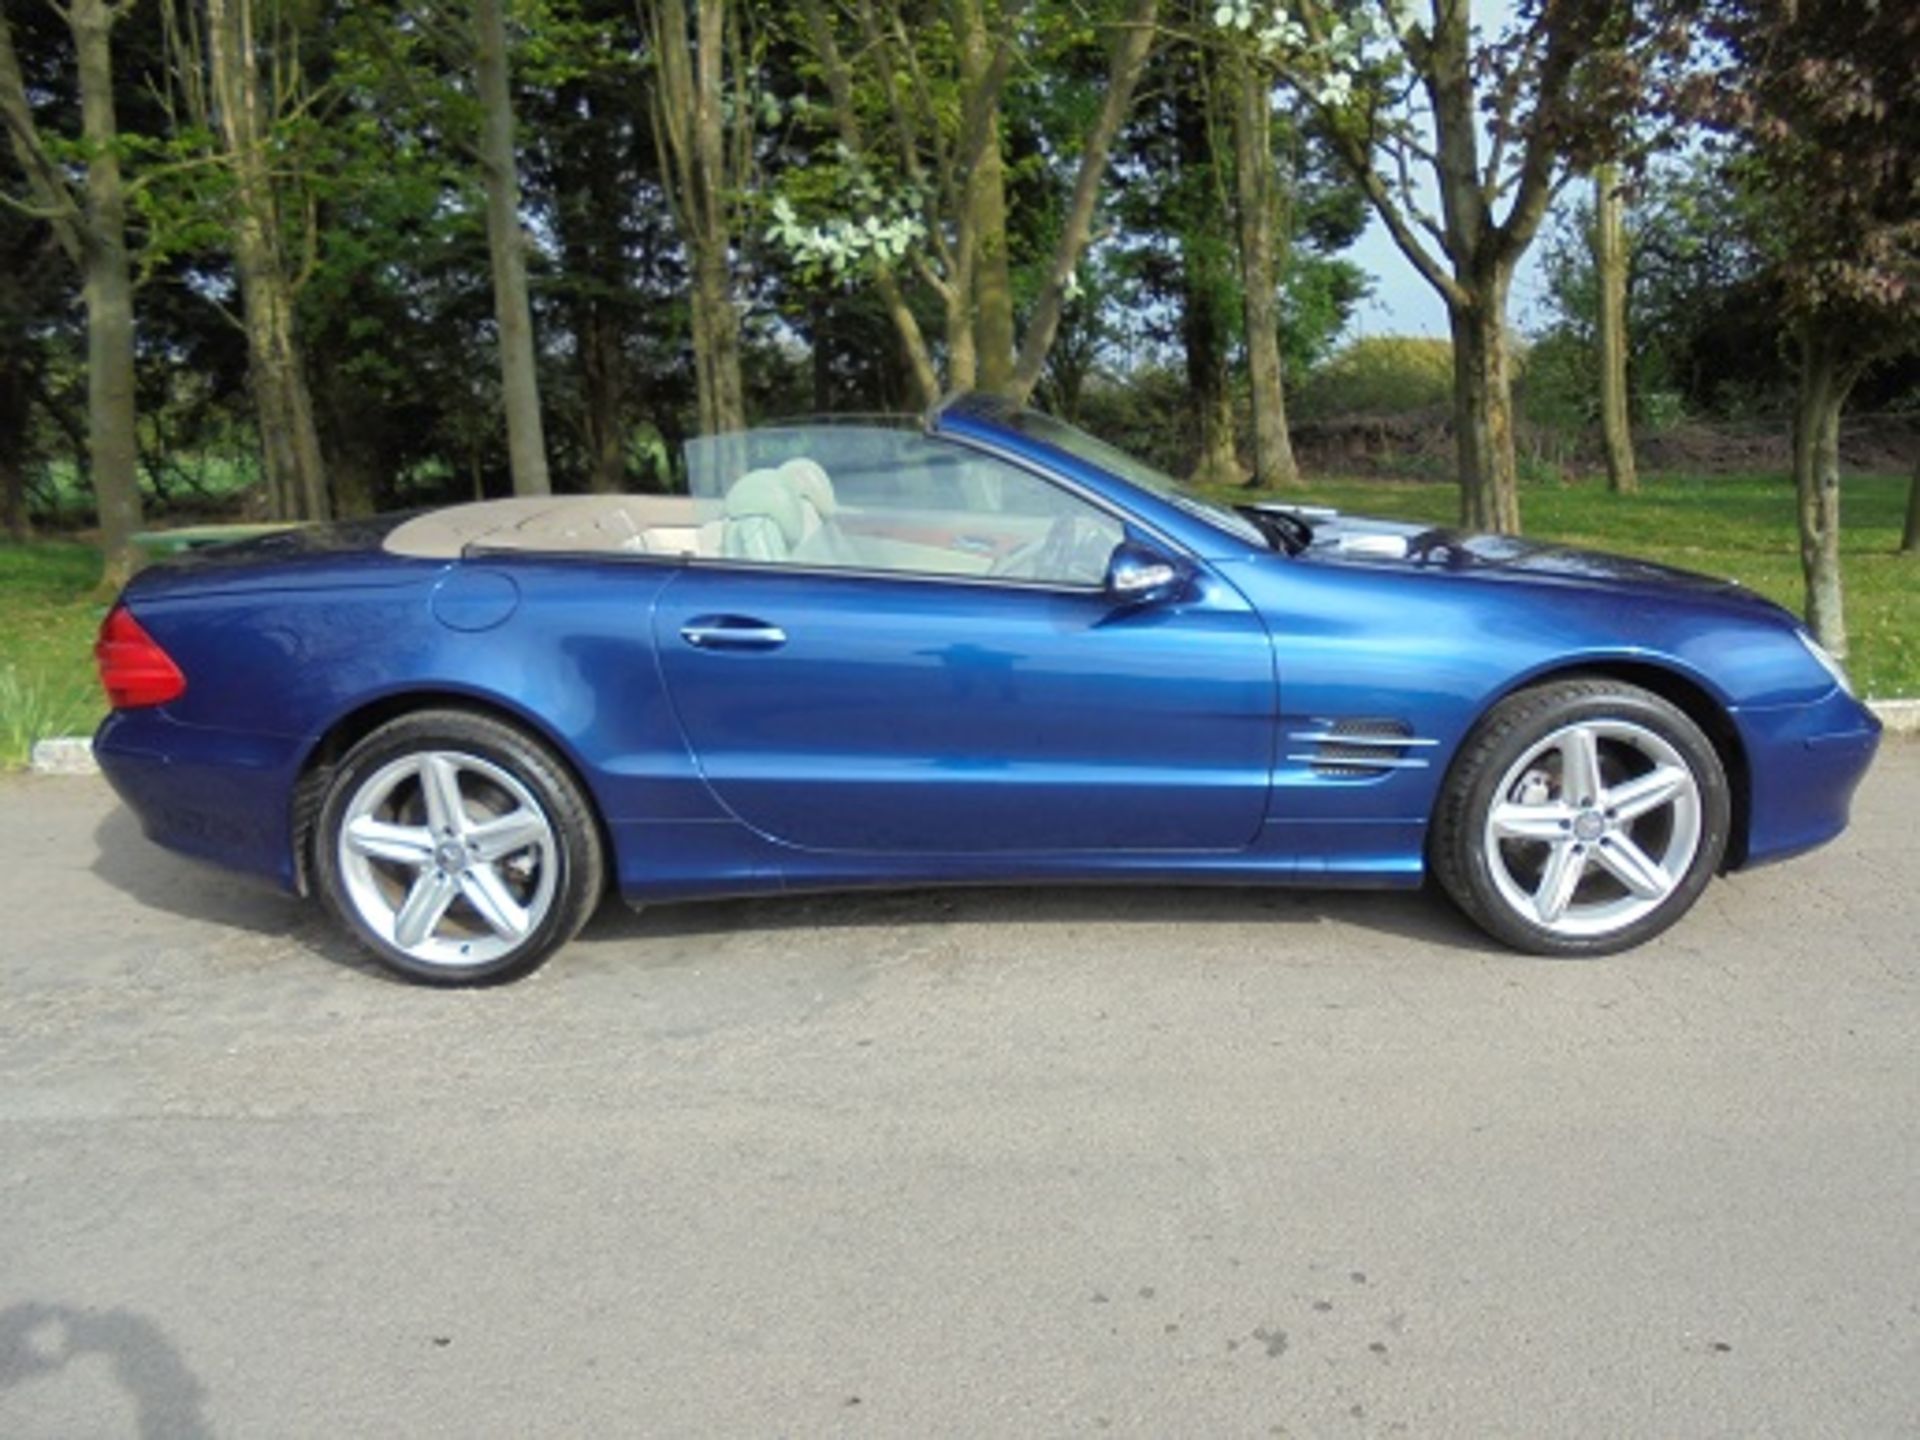 MERCEDES SL350 CONVERTIBLE WITH PRIVATE PLATE: L1OBY INCLUDED - Image 5 of 12